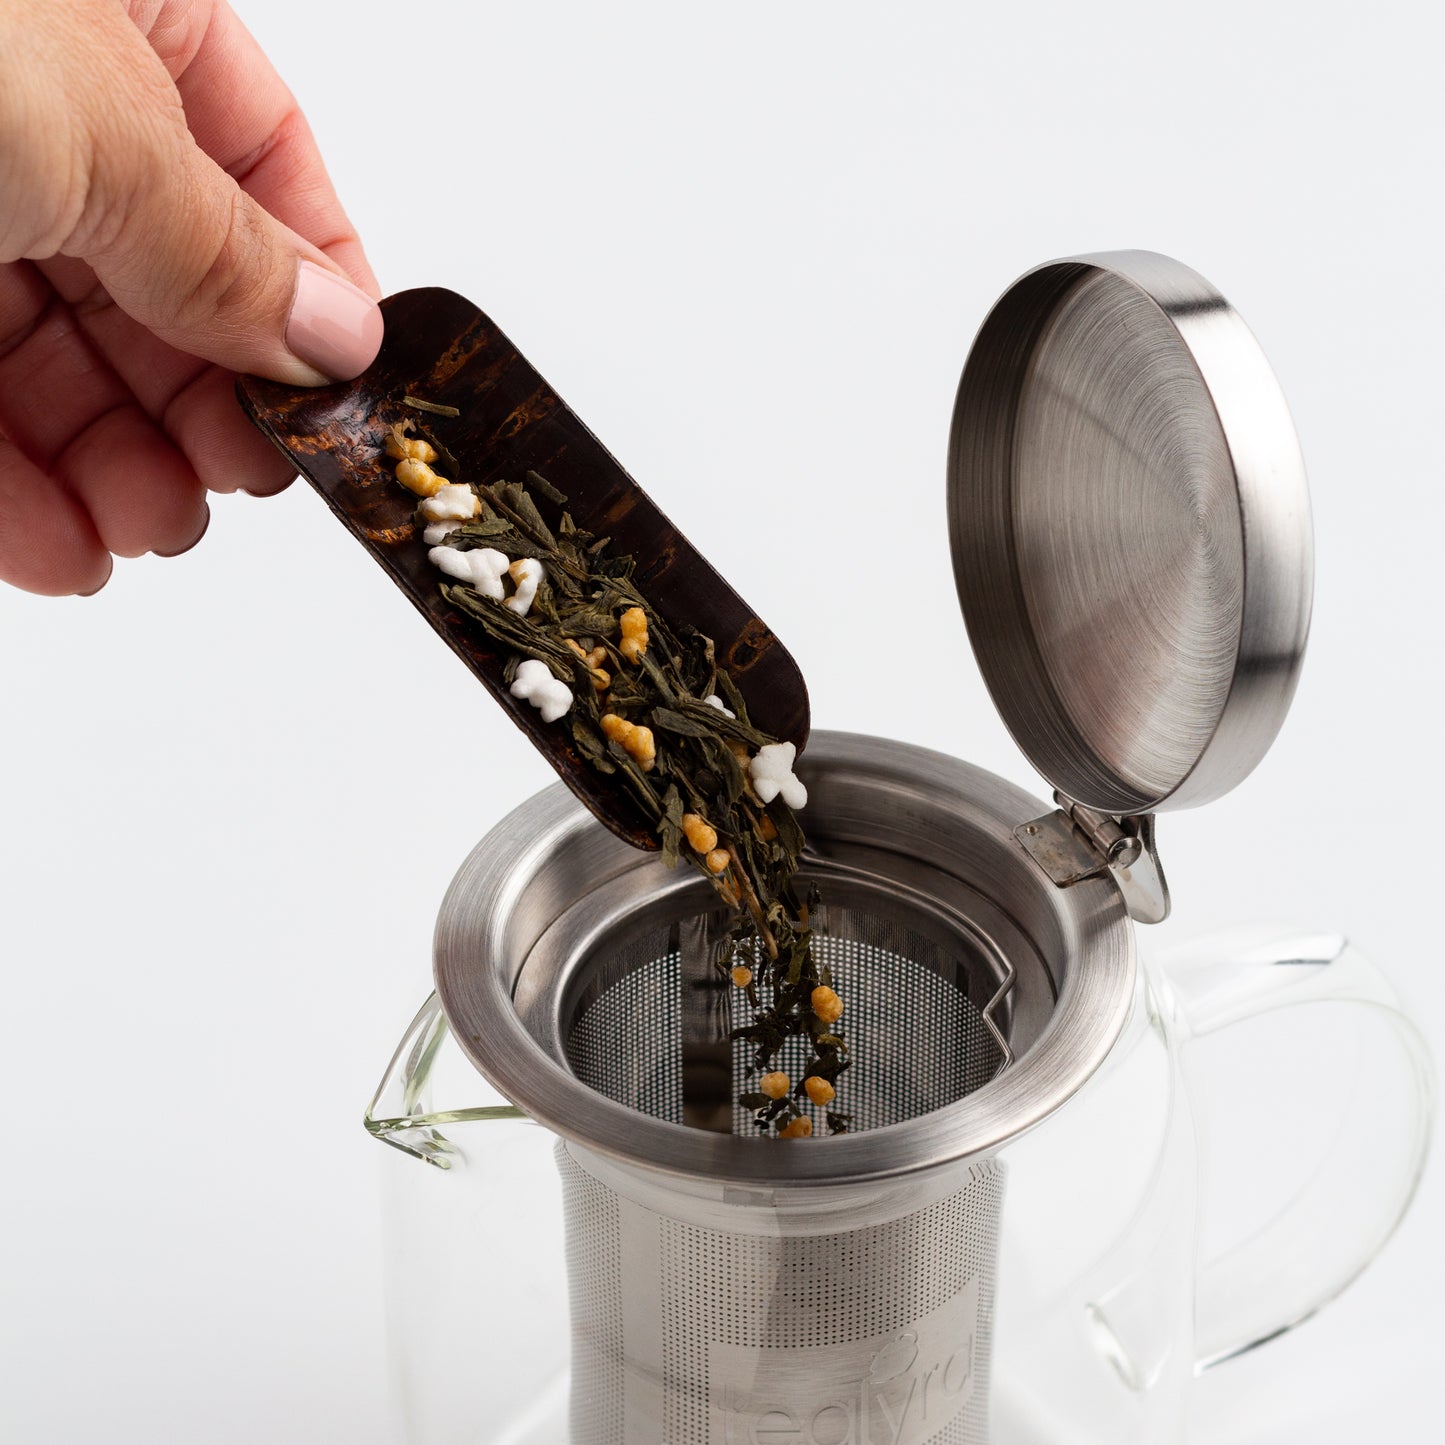 A hand shown using a cherry wood tea scoop to pour tea leaves into a stainless steel infuser in a glass teapot.